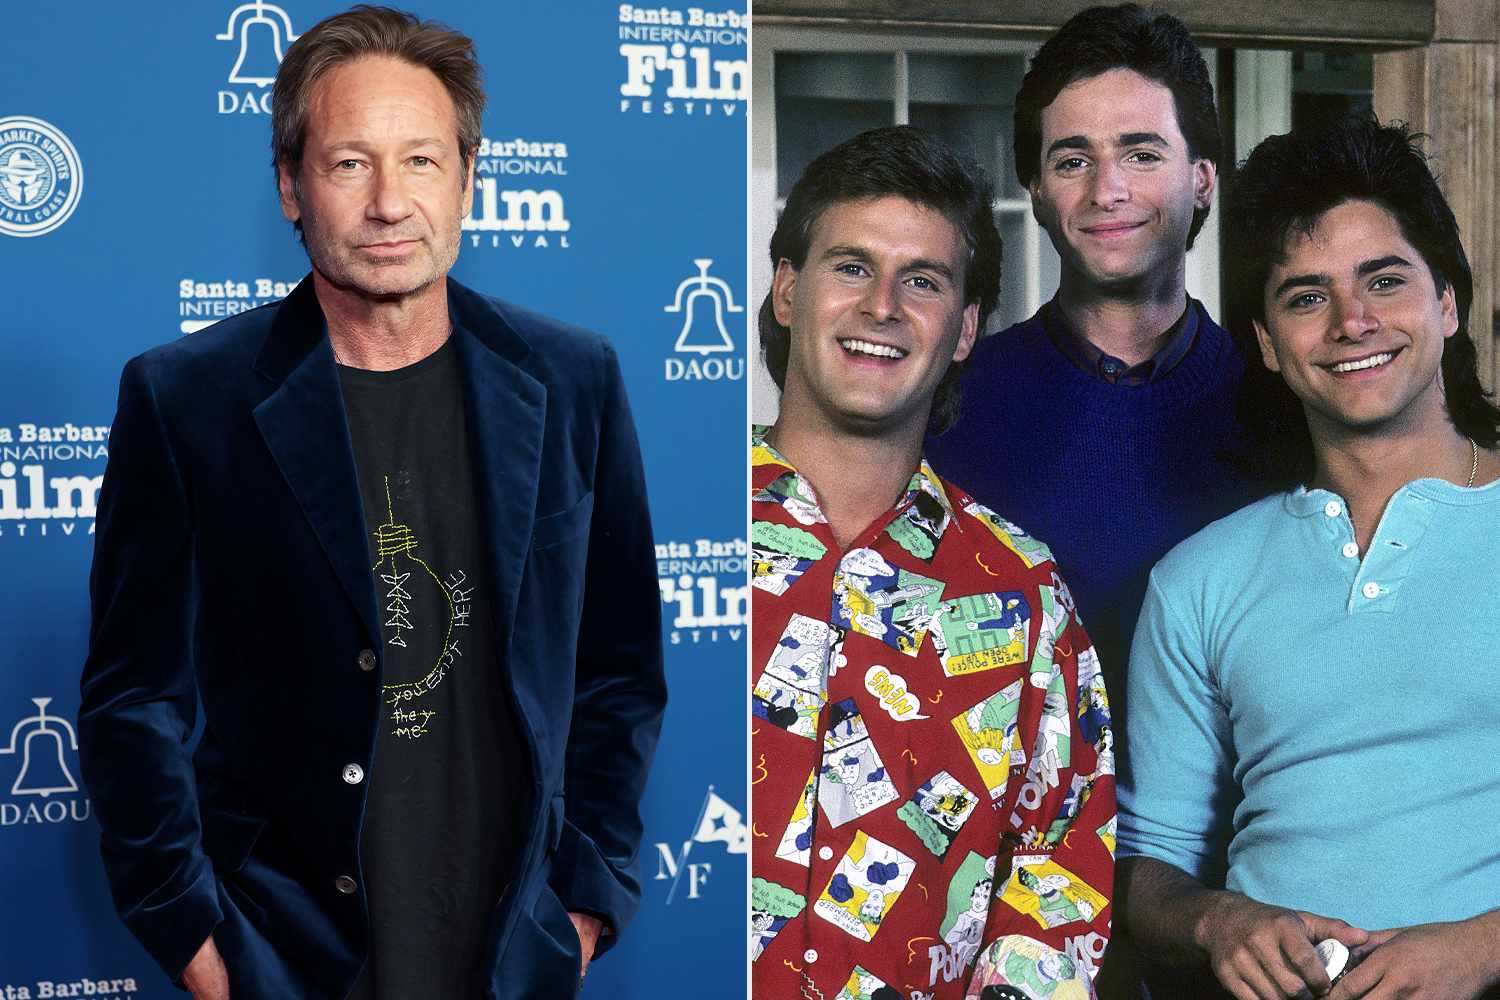 David Duchovny Recalls Losing Out on Playing All 3 Male Leads on 'Full House': 'I Wasn't Ready for That'